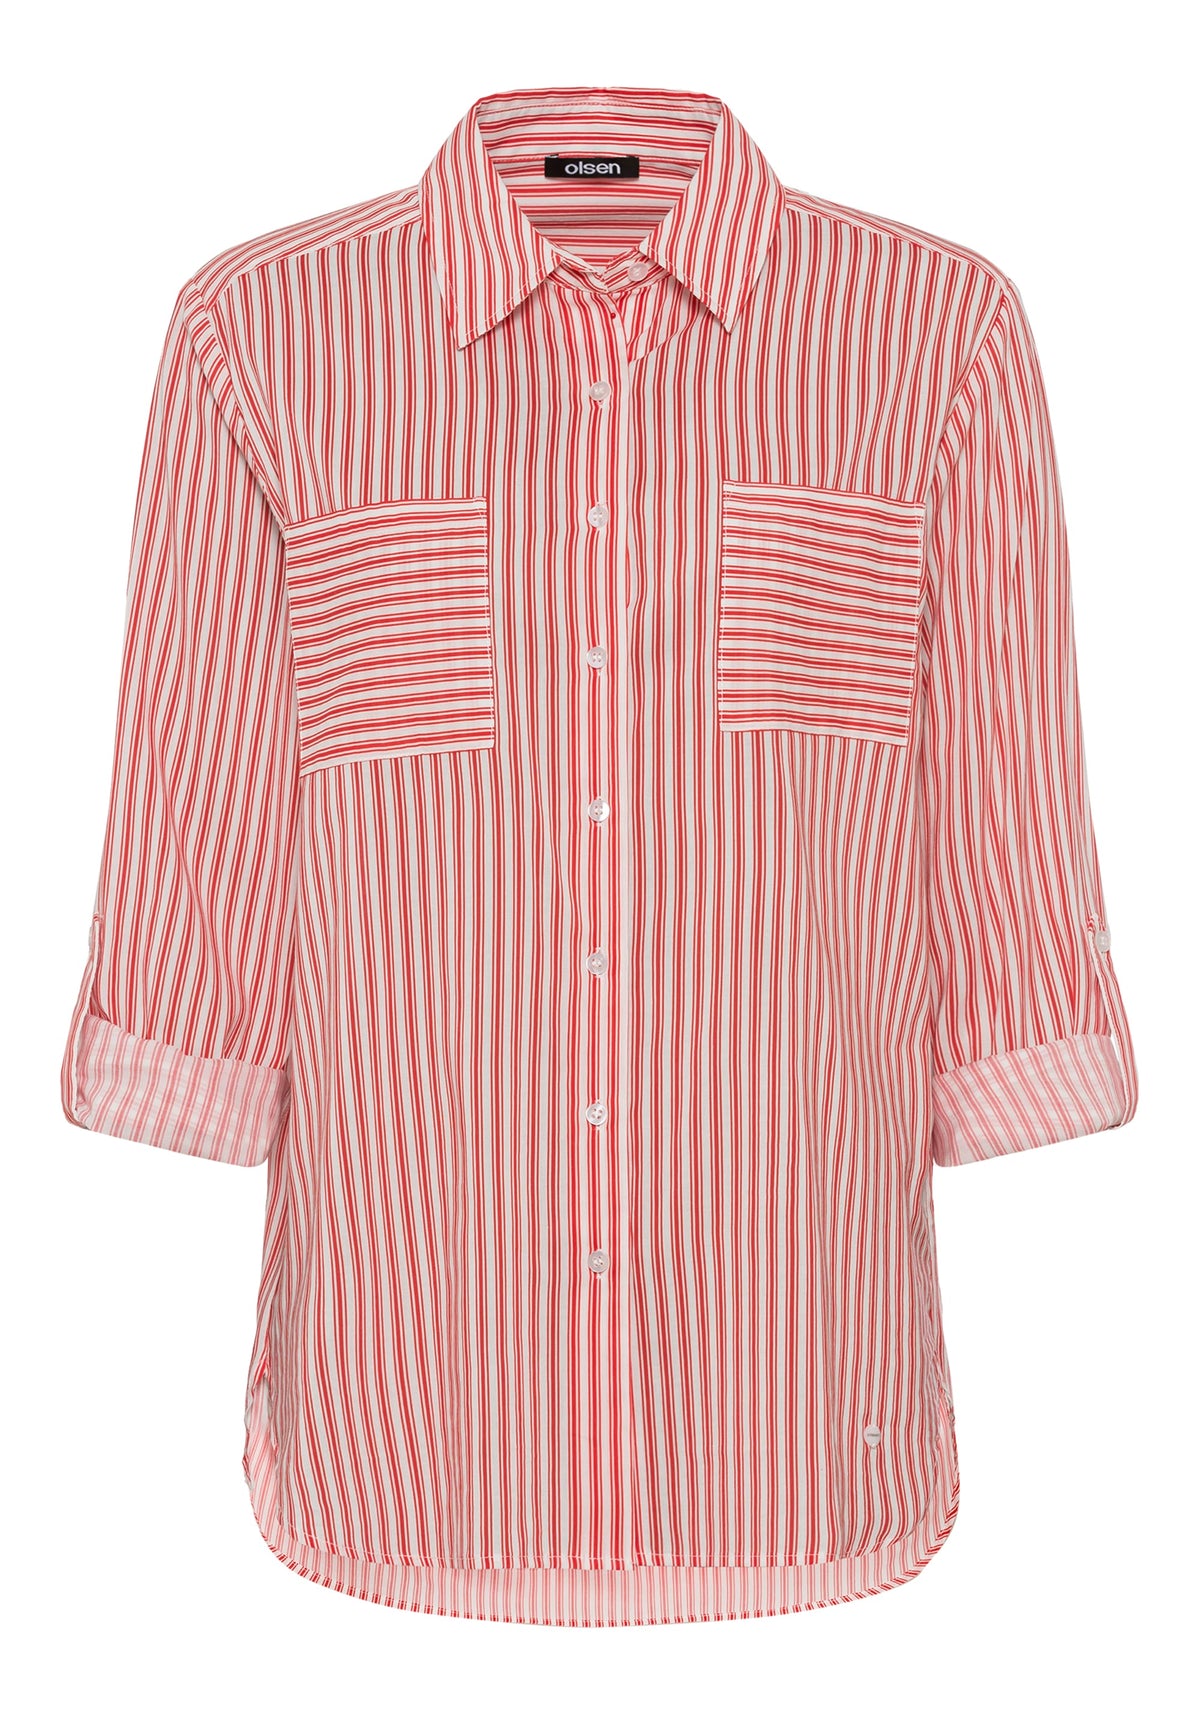 Cotton Blend Long Sleeve Striped Shirt with Roll Tab Sleeve Detail